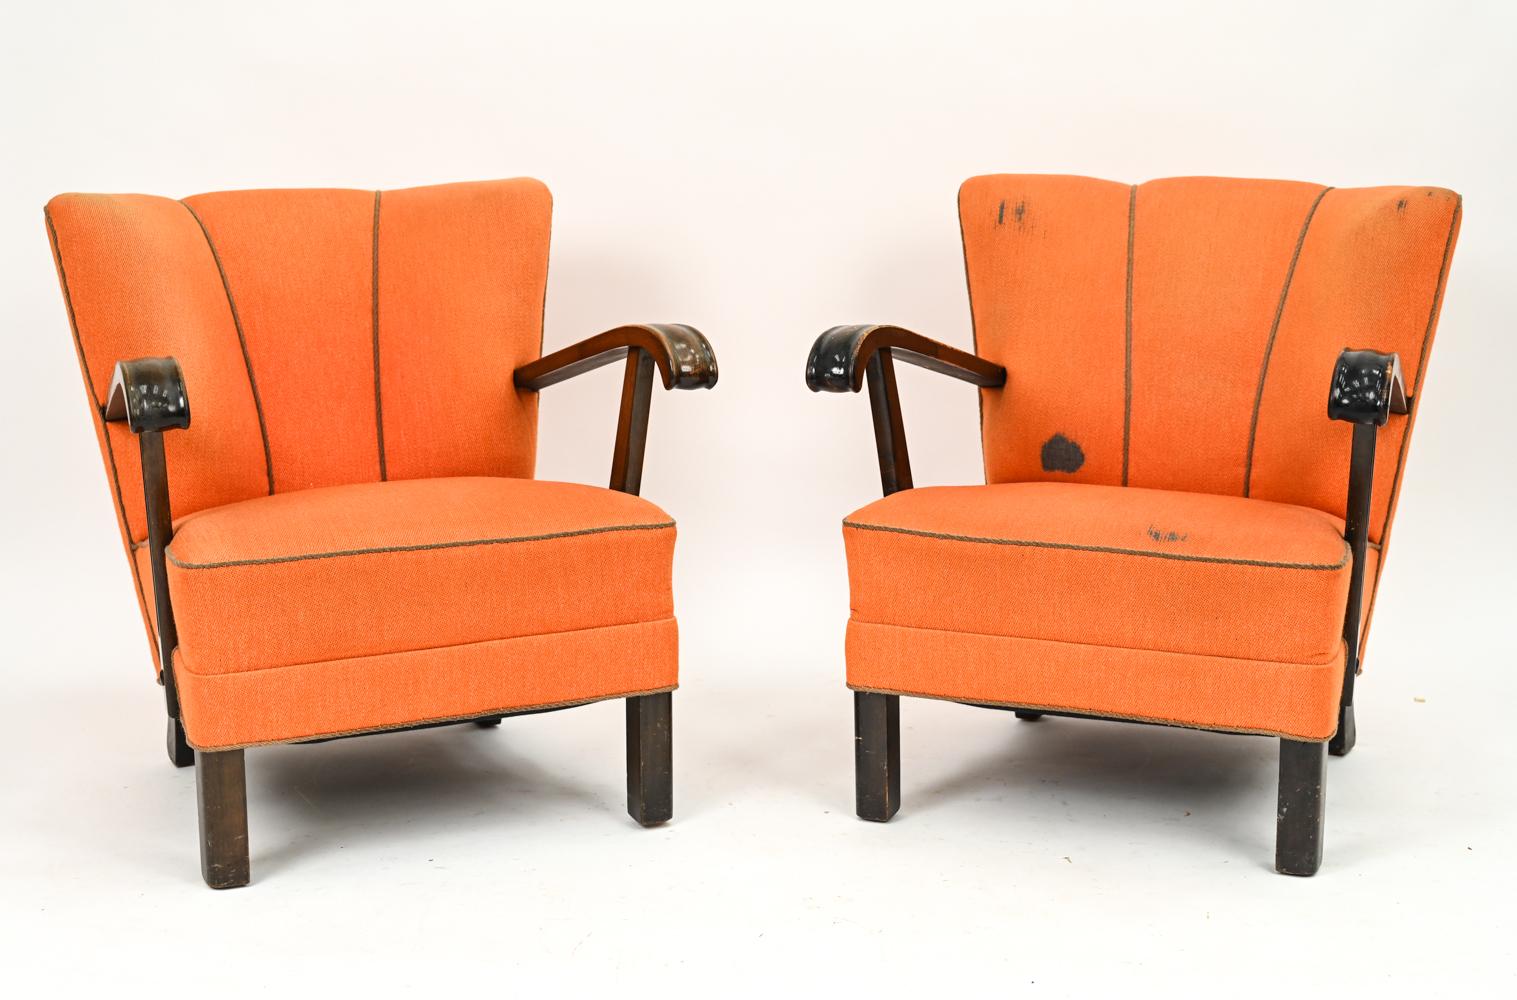 An elegant pair of early Scandinavian modern easy chairs by Slagelse, boasting design and sturdy craftsmanship of the highest caliber. These handsome chairs mark the transition from traditional design to Danish mid-century, with traditional carved